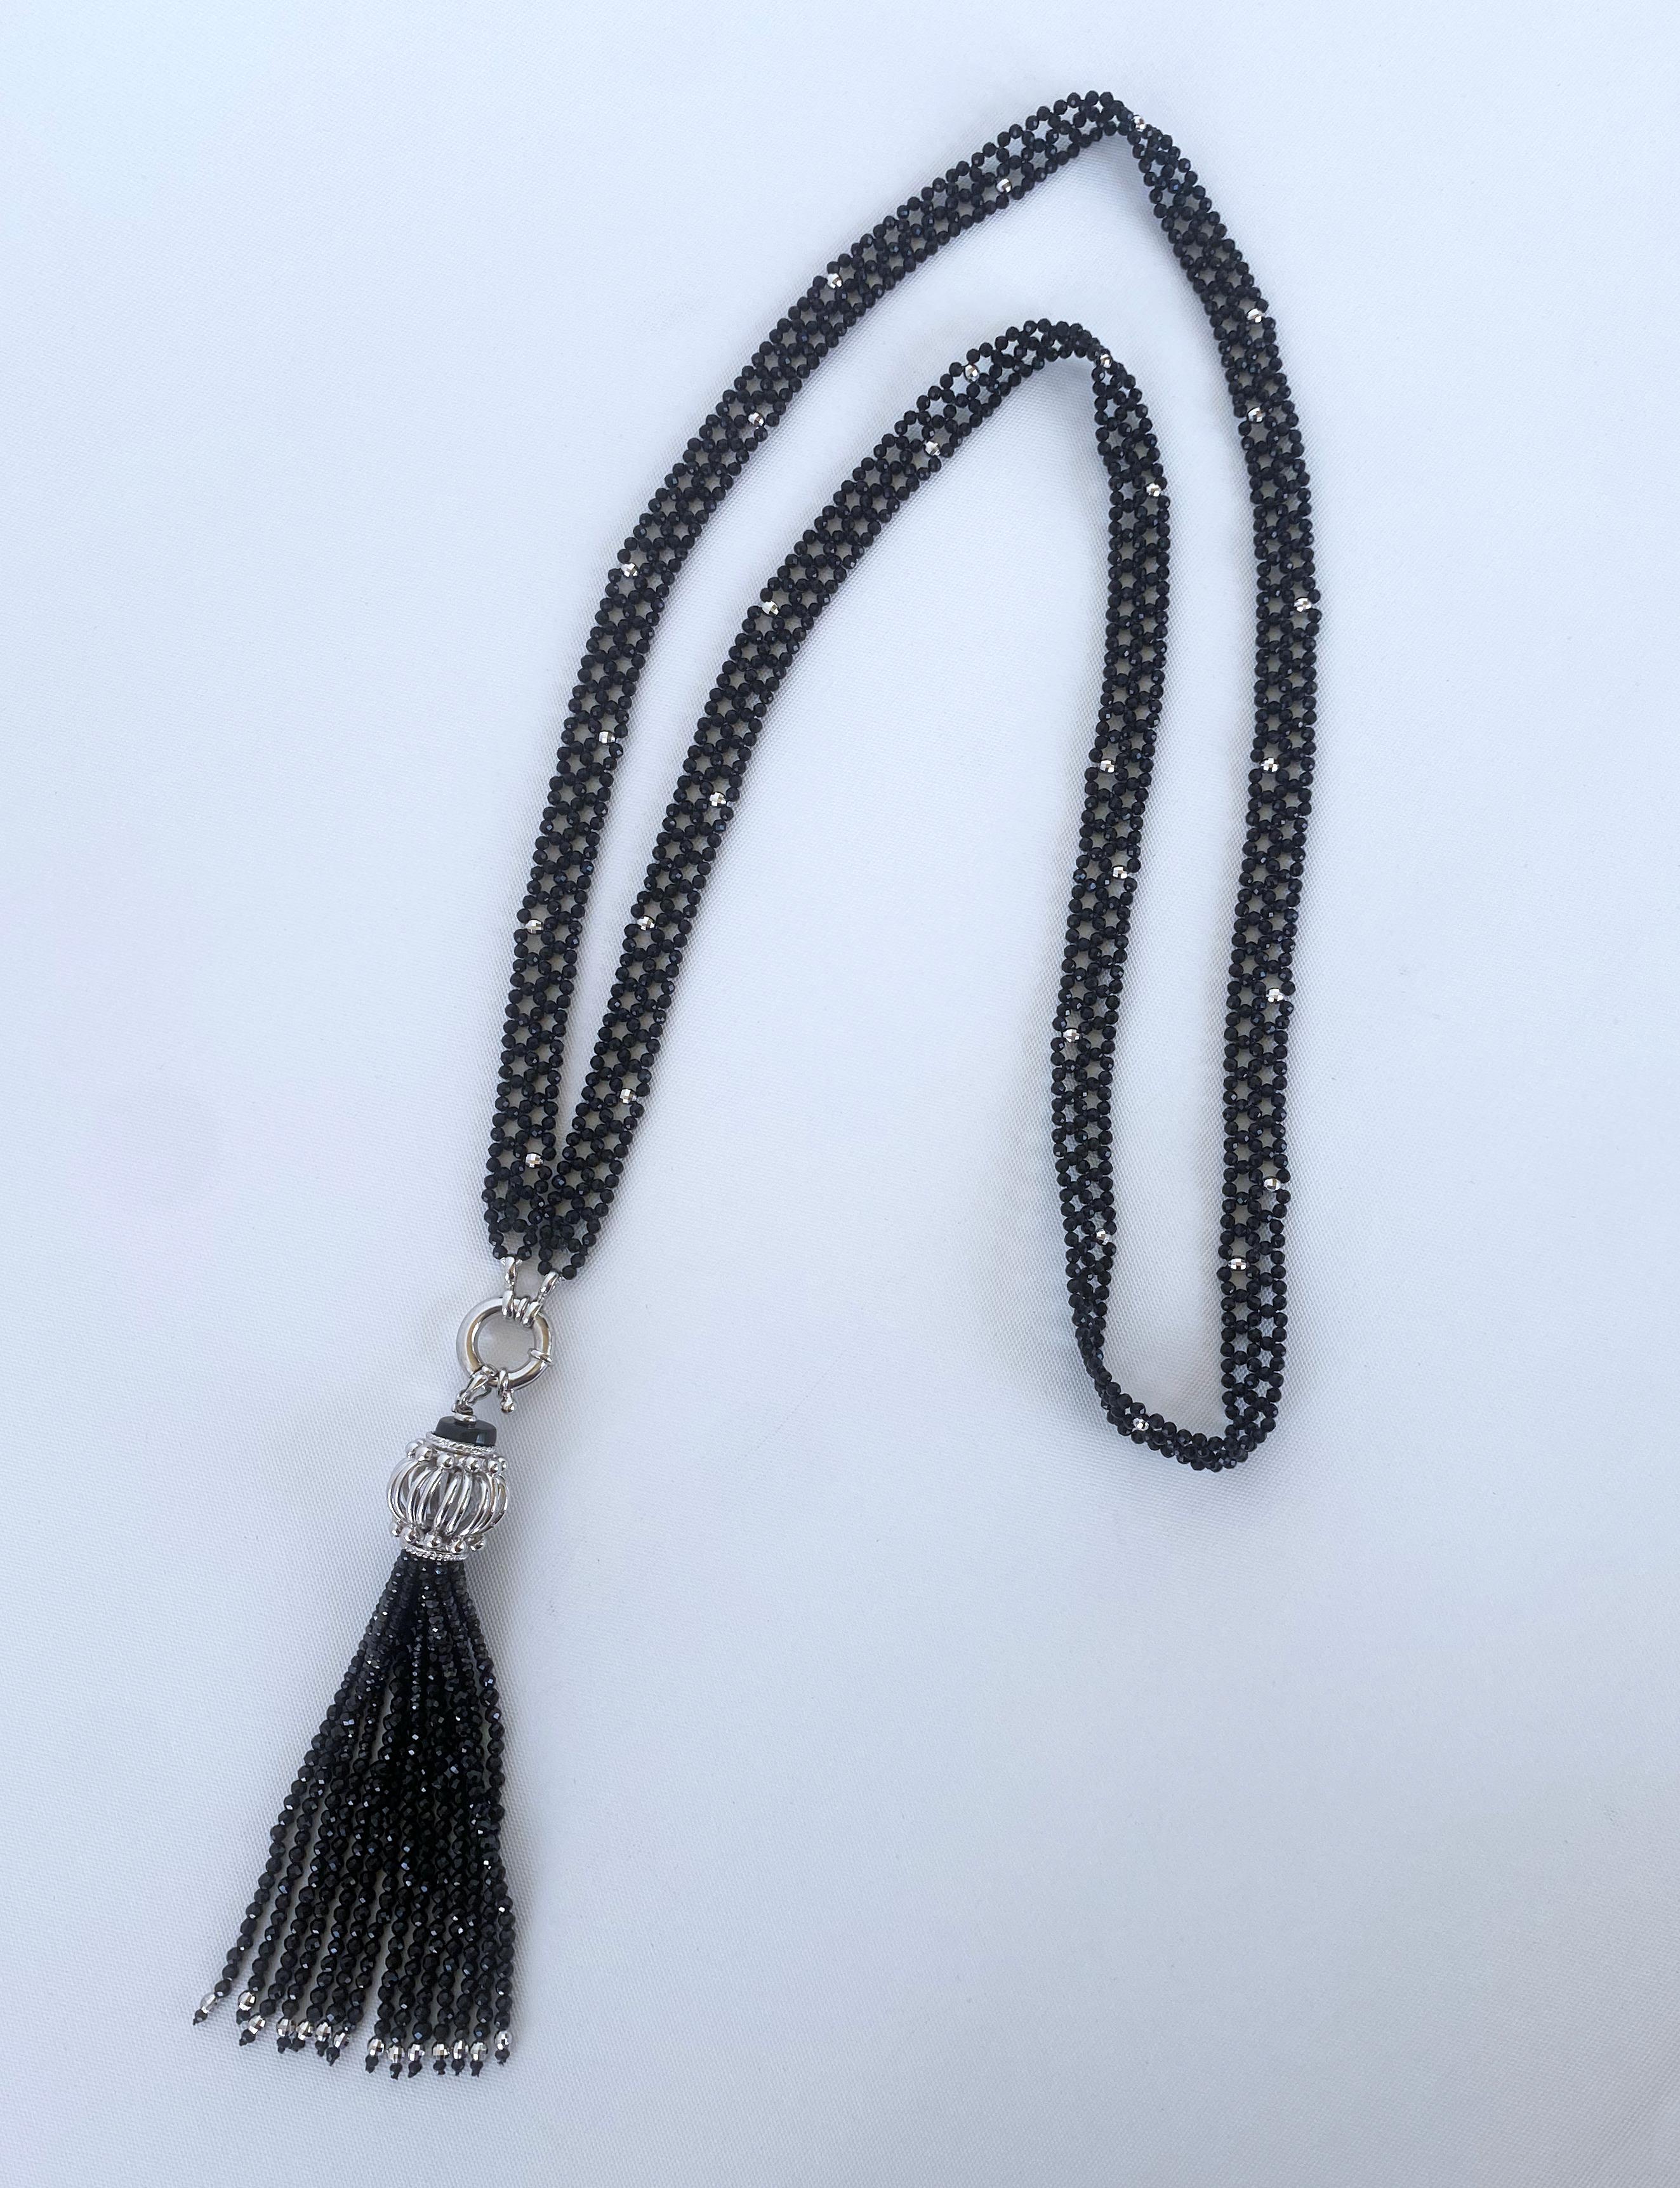 Striking One of A Kind Art Deco Inspired Black Sautoir by Marina J. This elegant piece features thousands of faceted Black Spinels all intricately woven together in a fine Lace like design. The faceted Spinel carry a thunderous shine and glisten